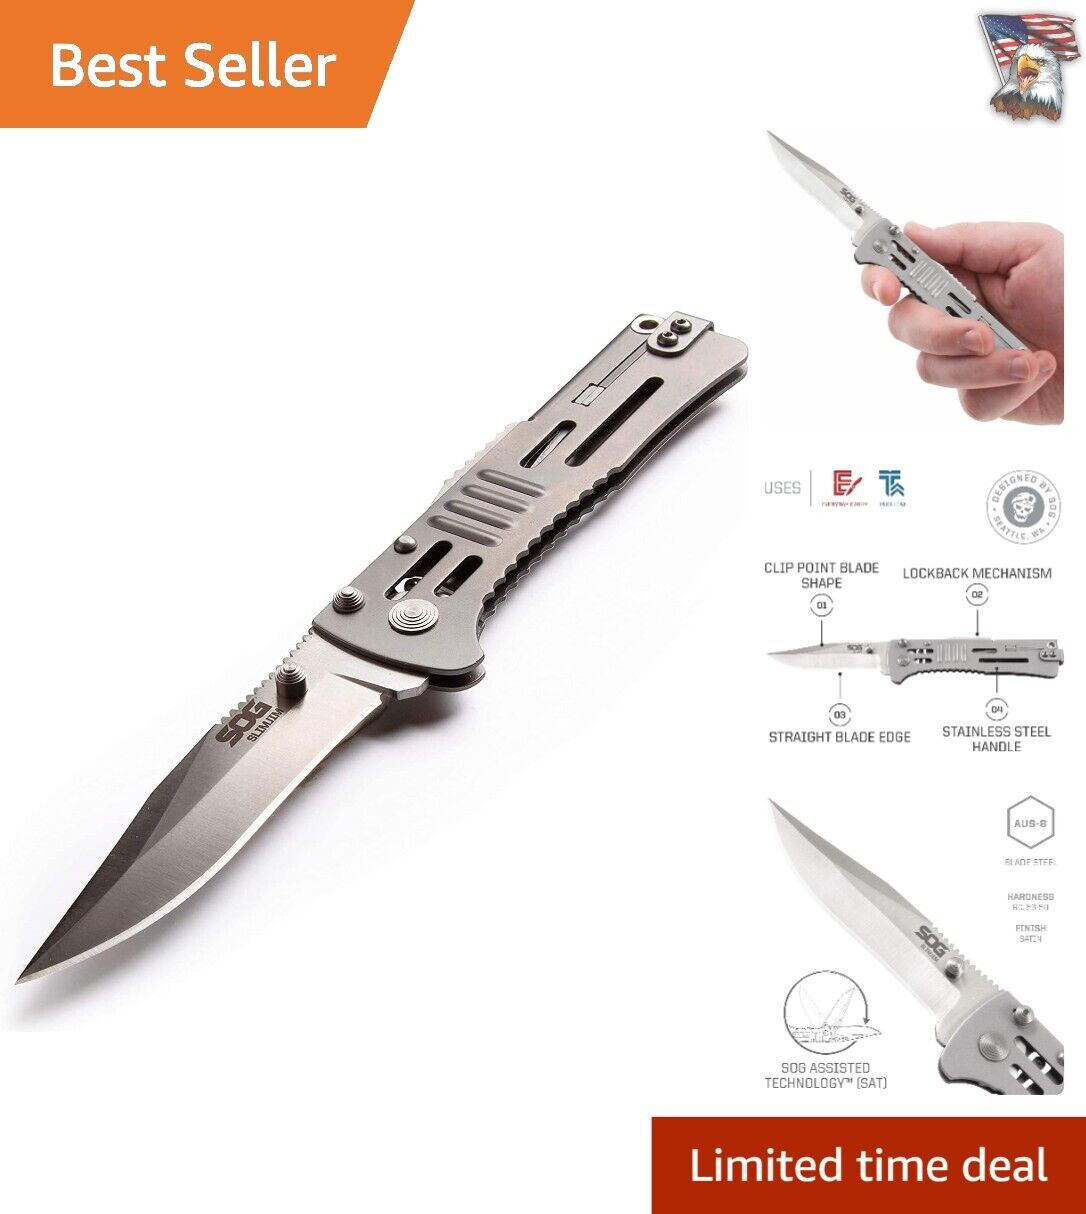 AUS-8 Stainless Steel Pocket Knife - SlimJim Compact Blade for Everyday Carry